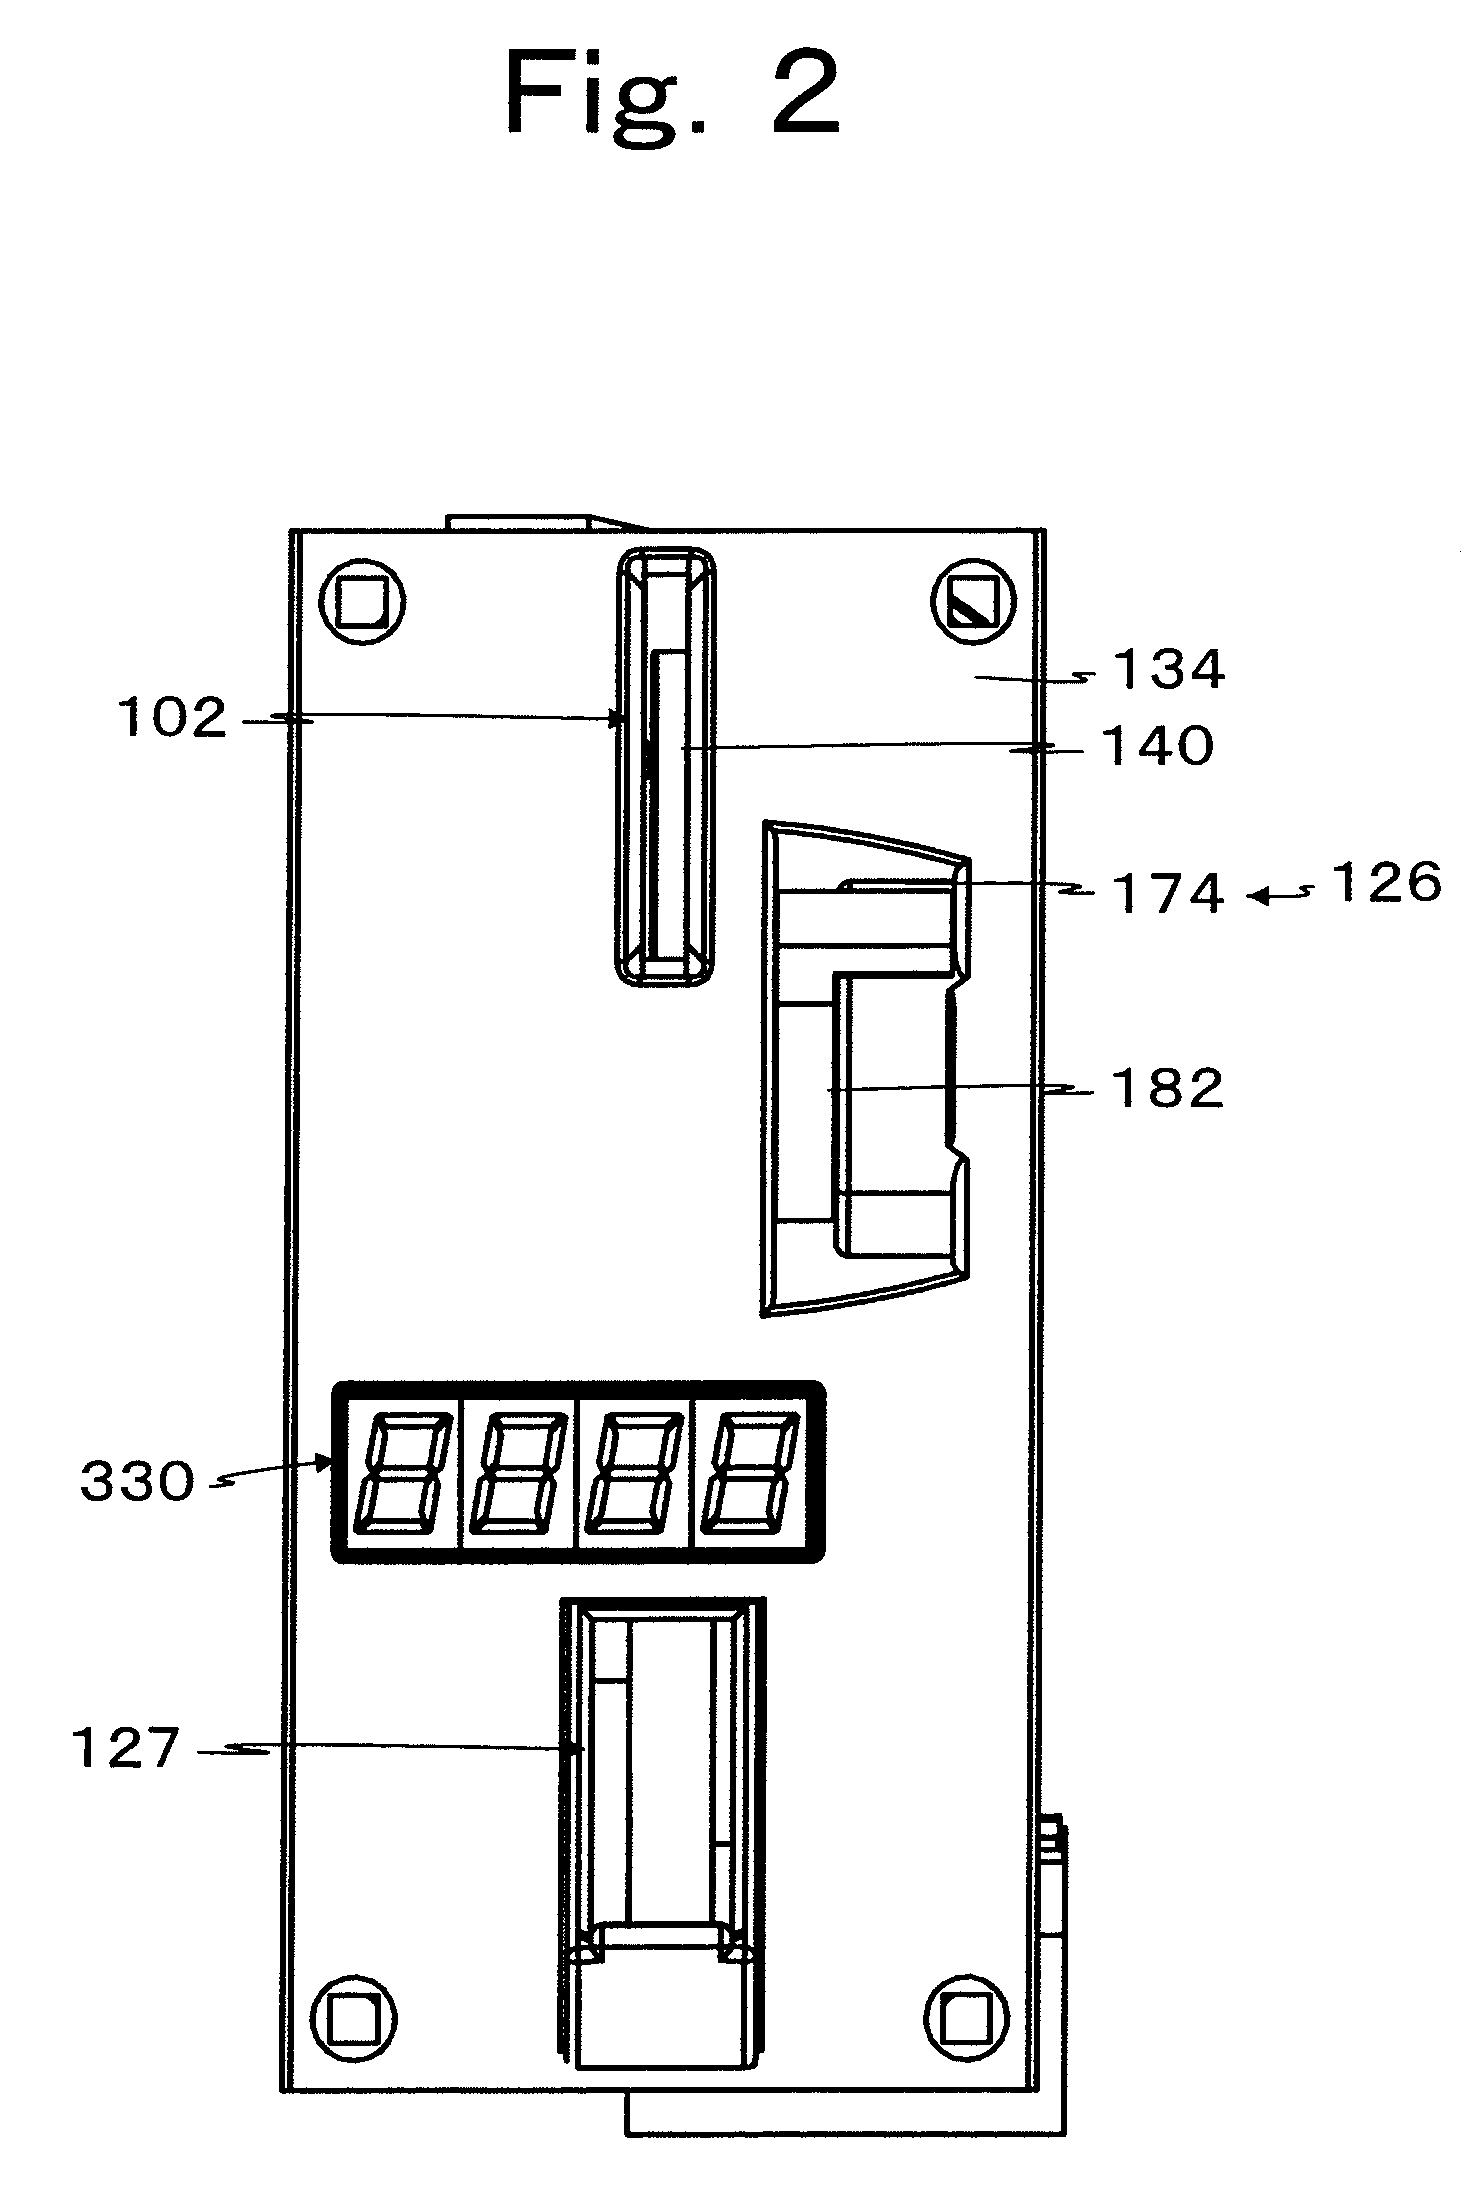 Value medium processing device for IC coins and monetary coins